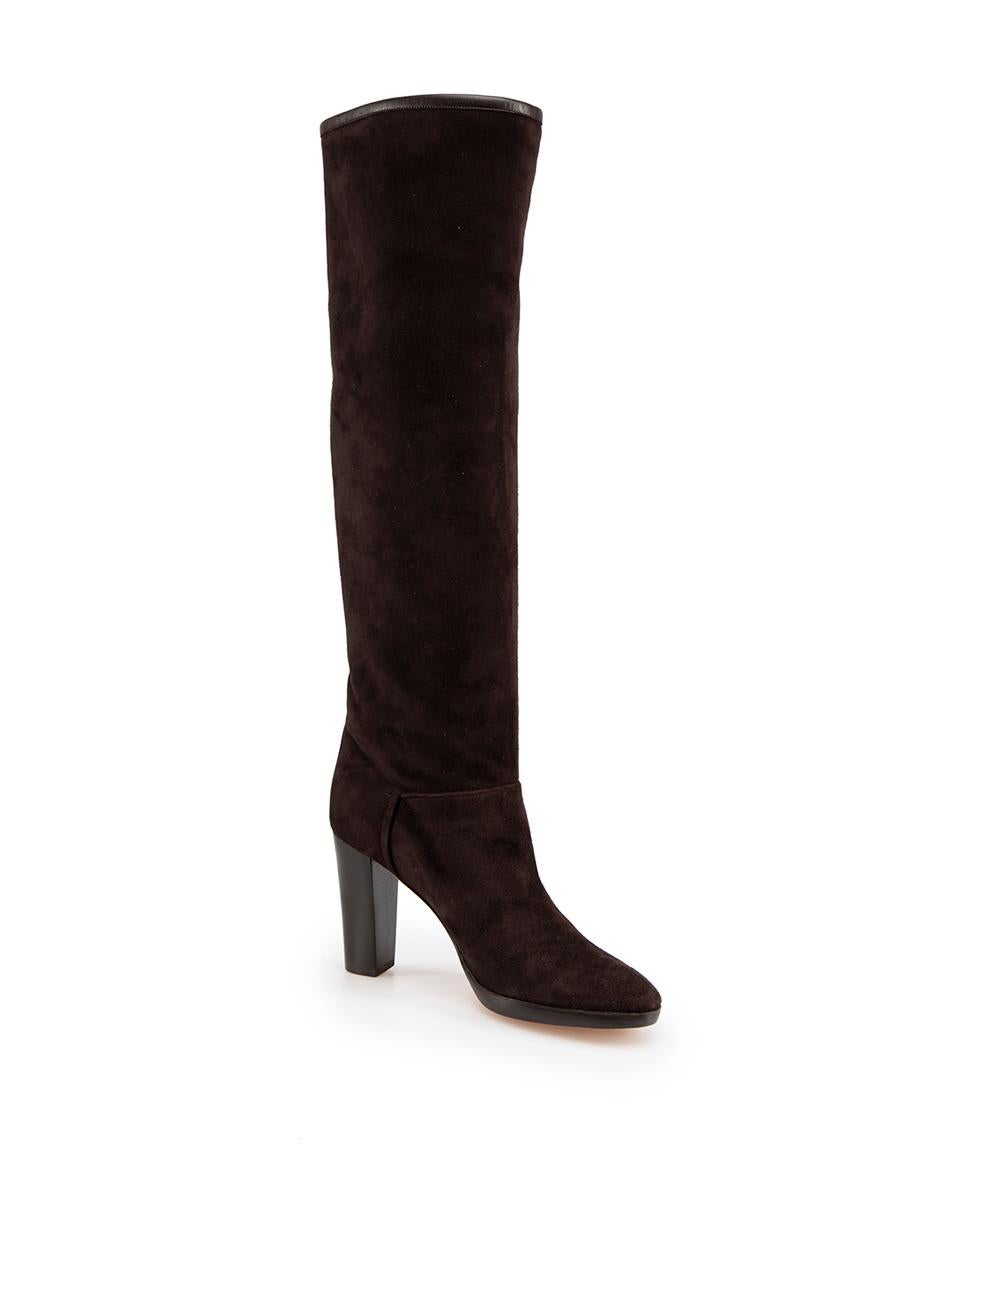 CONDITION is Never worn. No visible wear to boots is evident on this new Loro Piana designer resale item.

Details
Brown
Suede
Knee high boots
Almond toe
Heeled
Slip on
Made in Italy

Composition
EXTERIOR: Suede
INTERIOR: Cloth textile

Size &